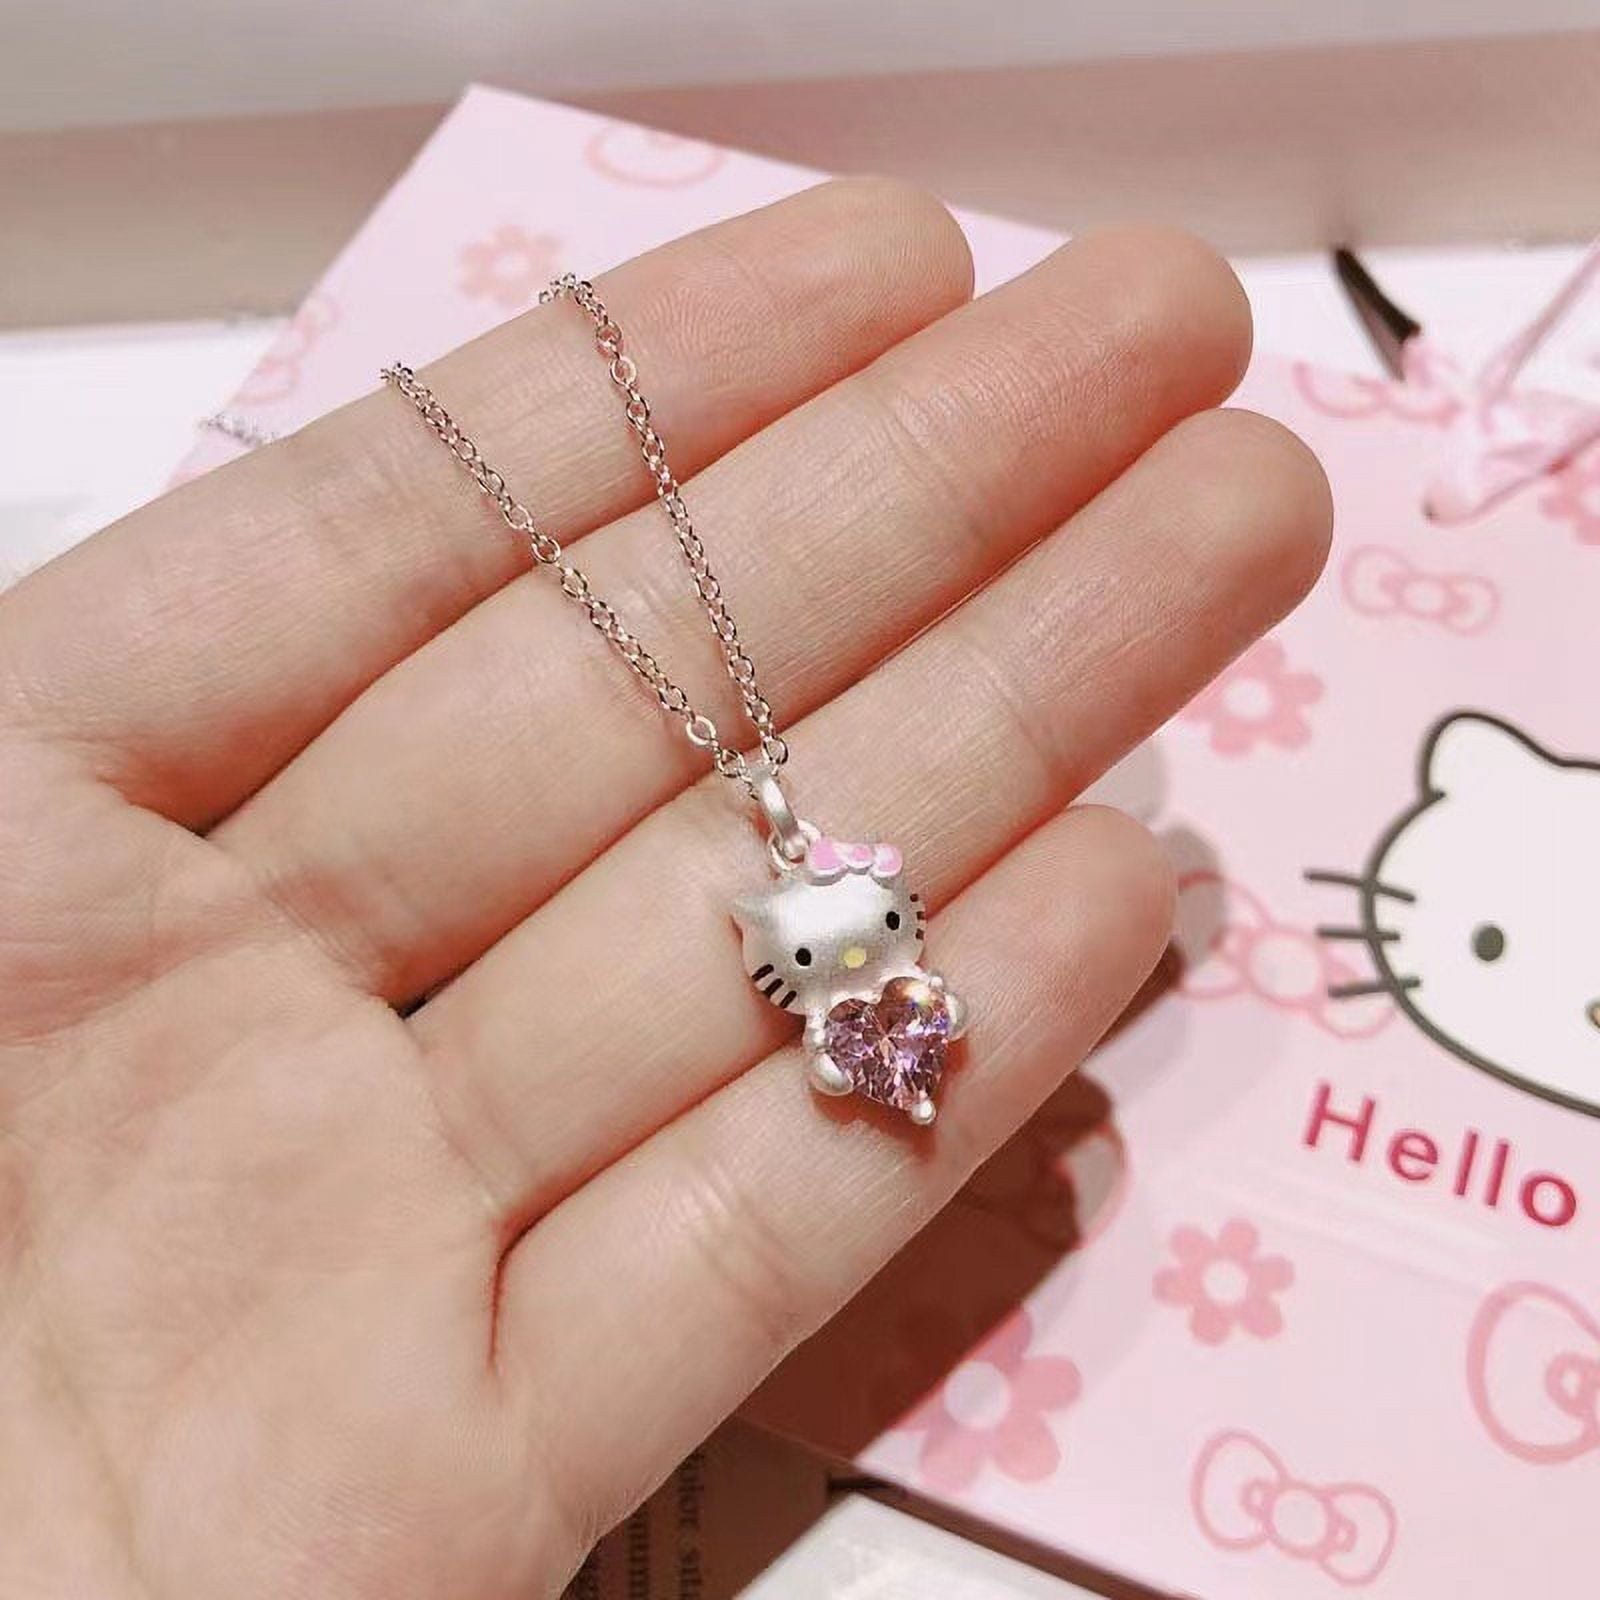 Kawaii Sanrio MyMelody Necklace Cartoon Rose Gold Plated Clavicle Chain  Jewelry Girls Cherry Blossom Diamond Pendant Accessory - AliExpress